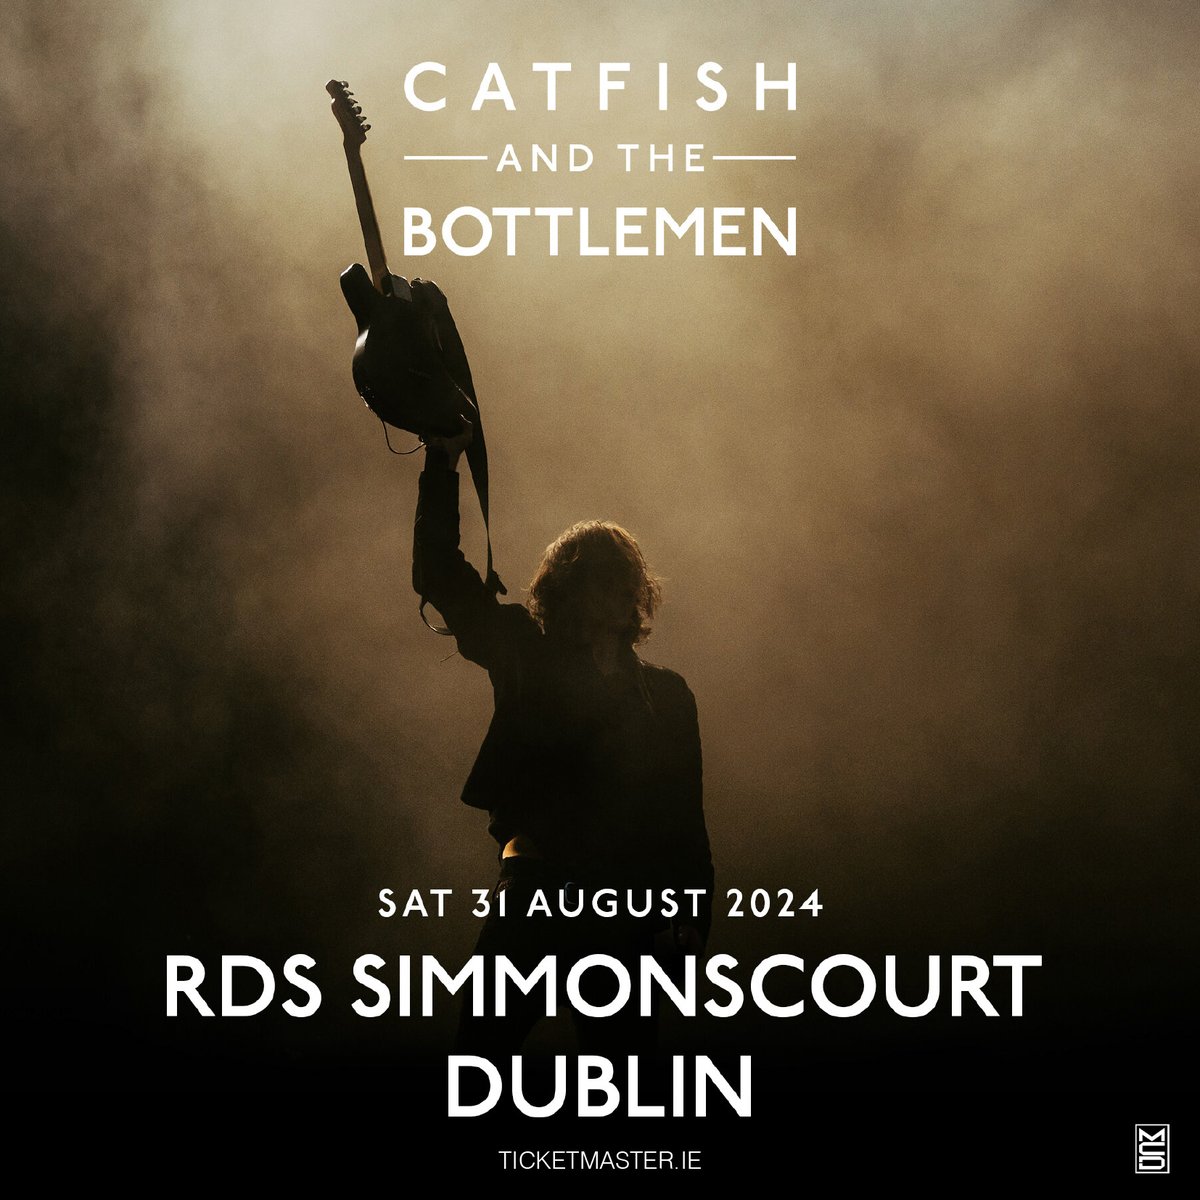 🚨 𝗢𝗡 𝗦𝗔𝗟𝗘 𝗡𝗢𝗪 - Catfish and @thebottlemen play a massive headline show at RDS Simmonscourt on Saturday 31 August 2024. 🎫 Grab your tickets now bit.ly/3UTOf0M